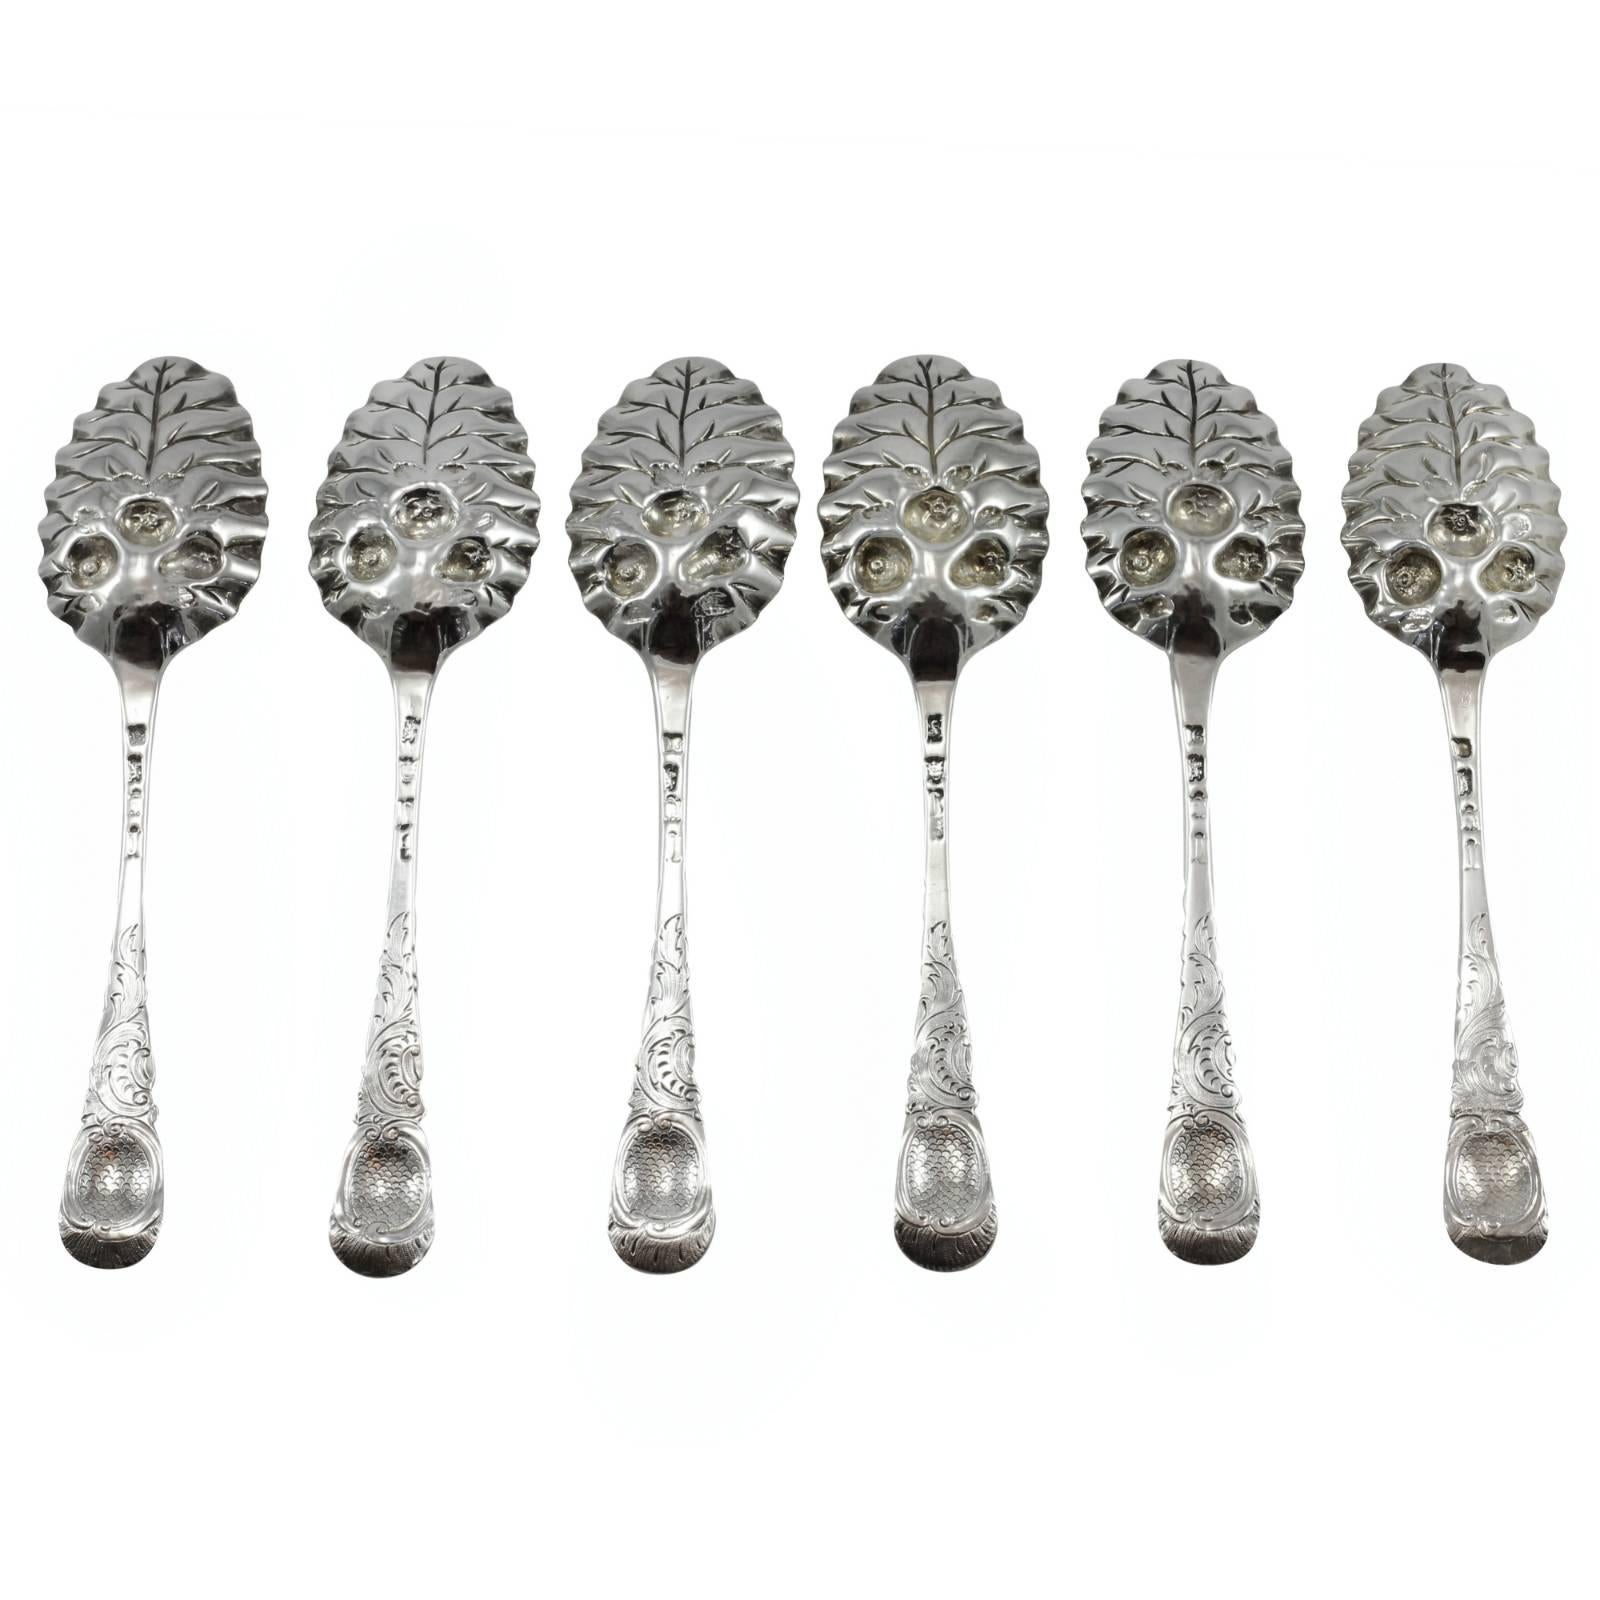 Set of six Georgian sterling silver ‘Old English’ style berry spoons by London based silversmith Ebenezer Coker.